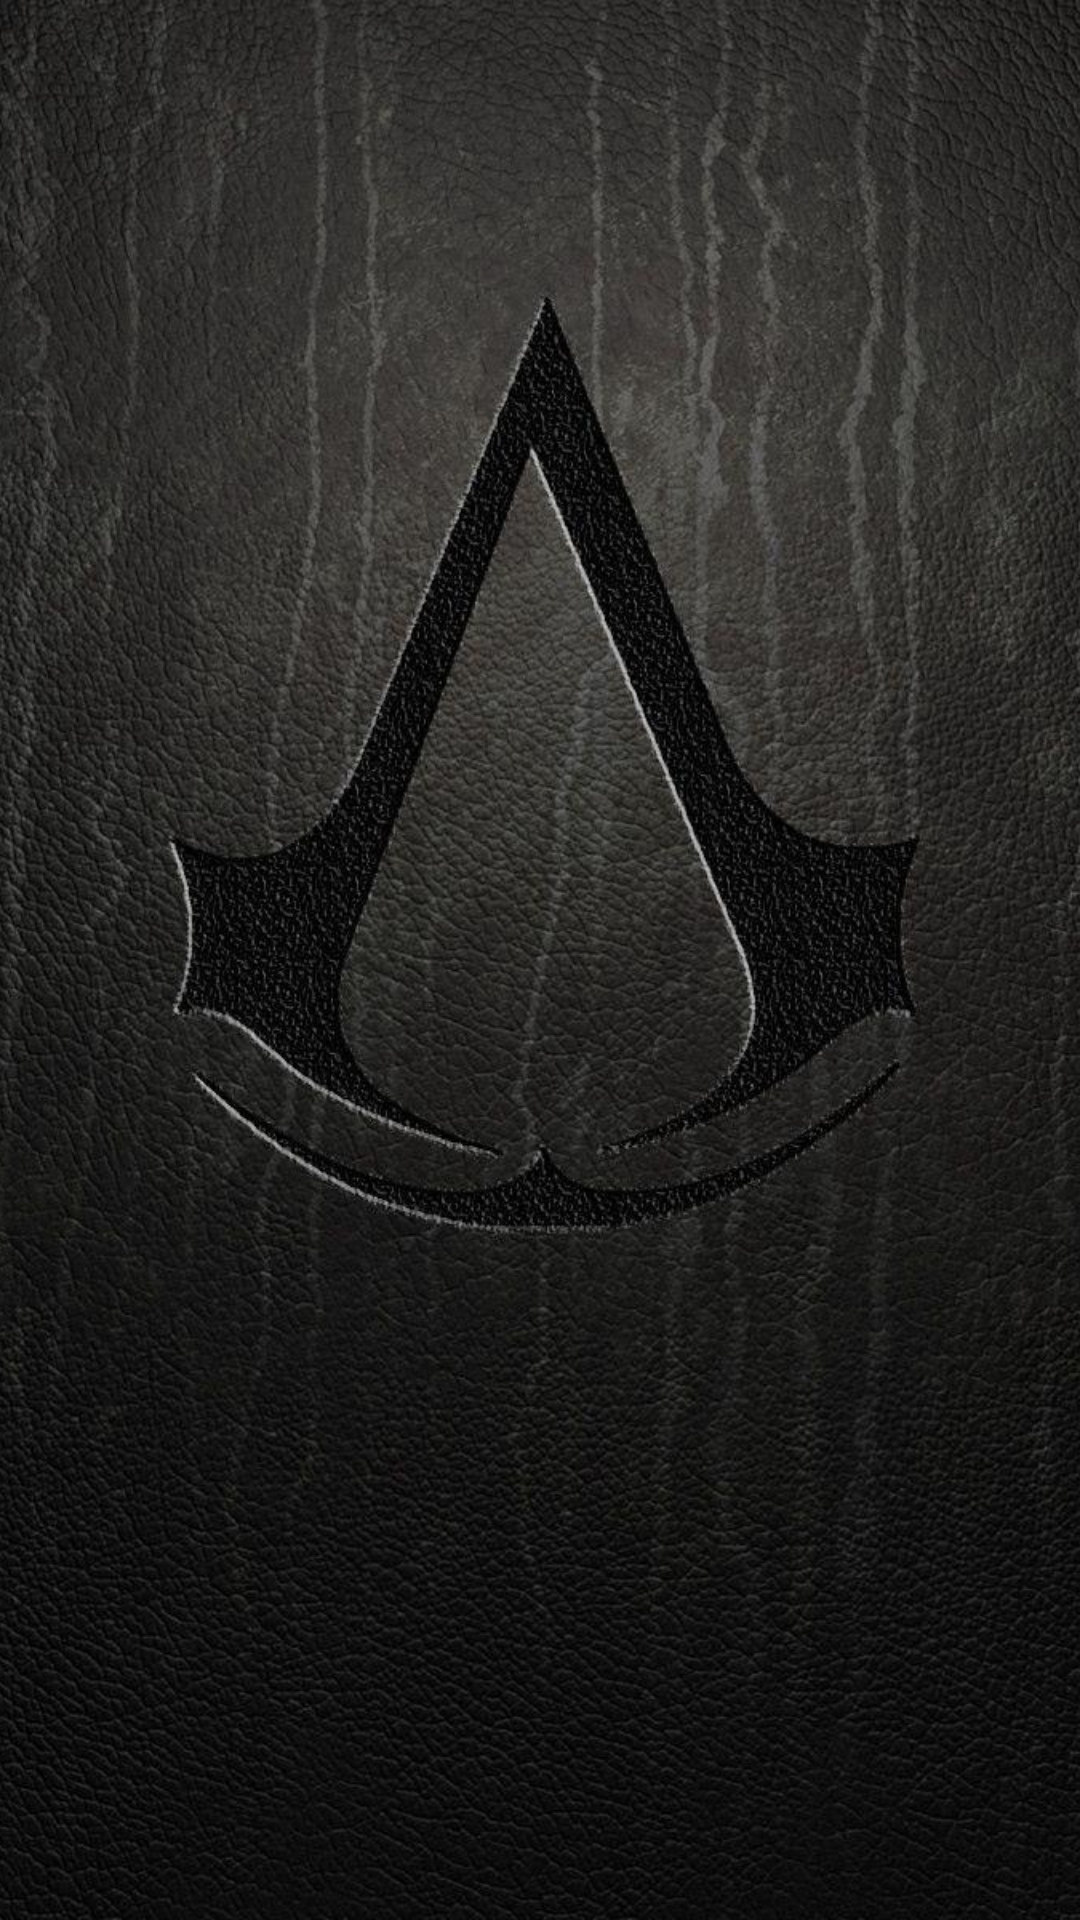 Aesthteic Assassin's Creed Logo Wallpaper